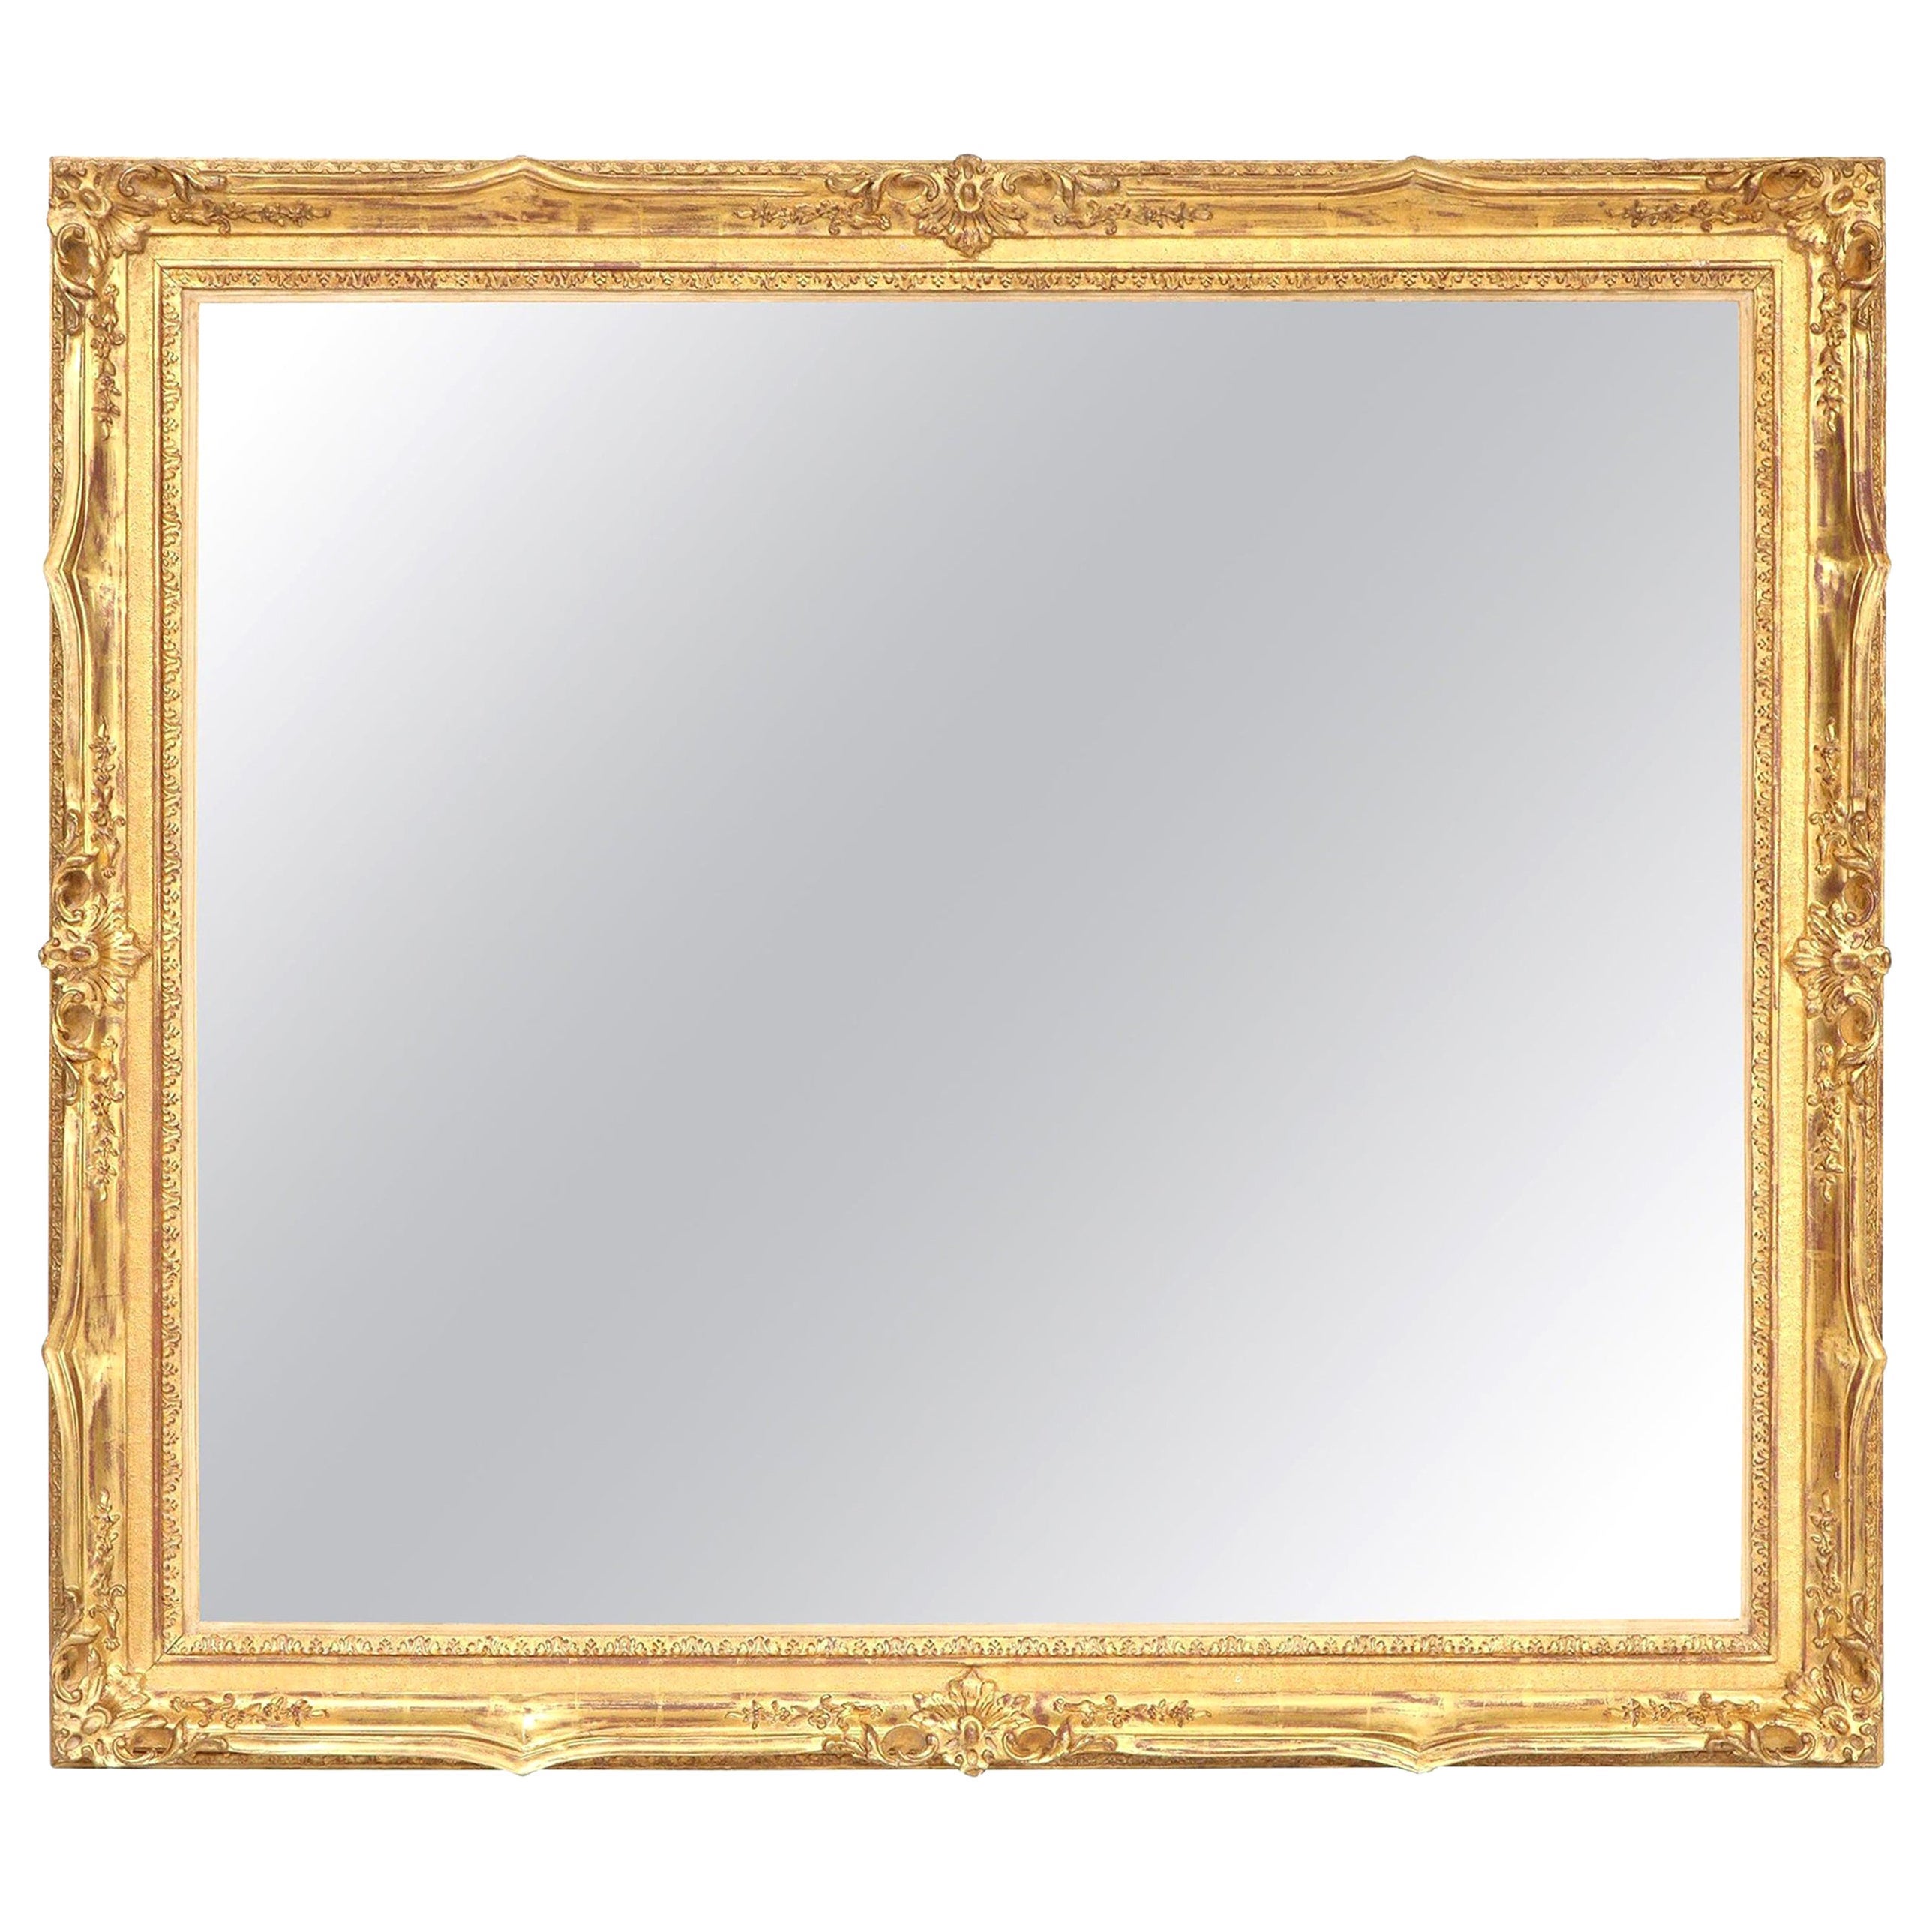 Mirror, Decorative Large Mirror, Antique Large Wall Mirror, Gold Leaf Frame